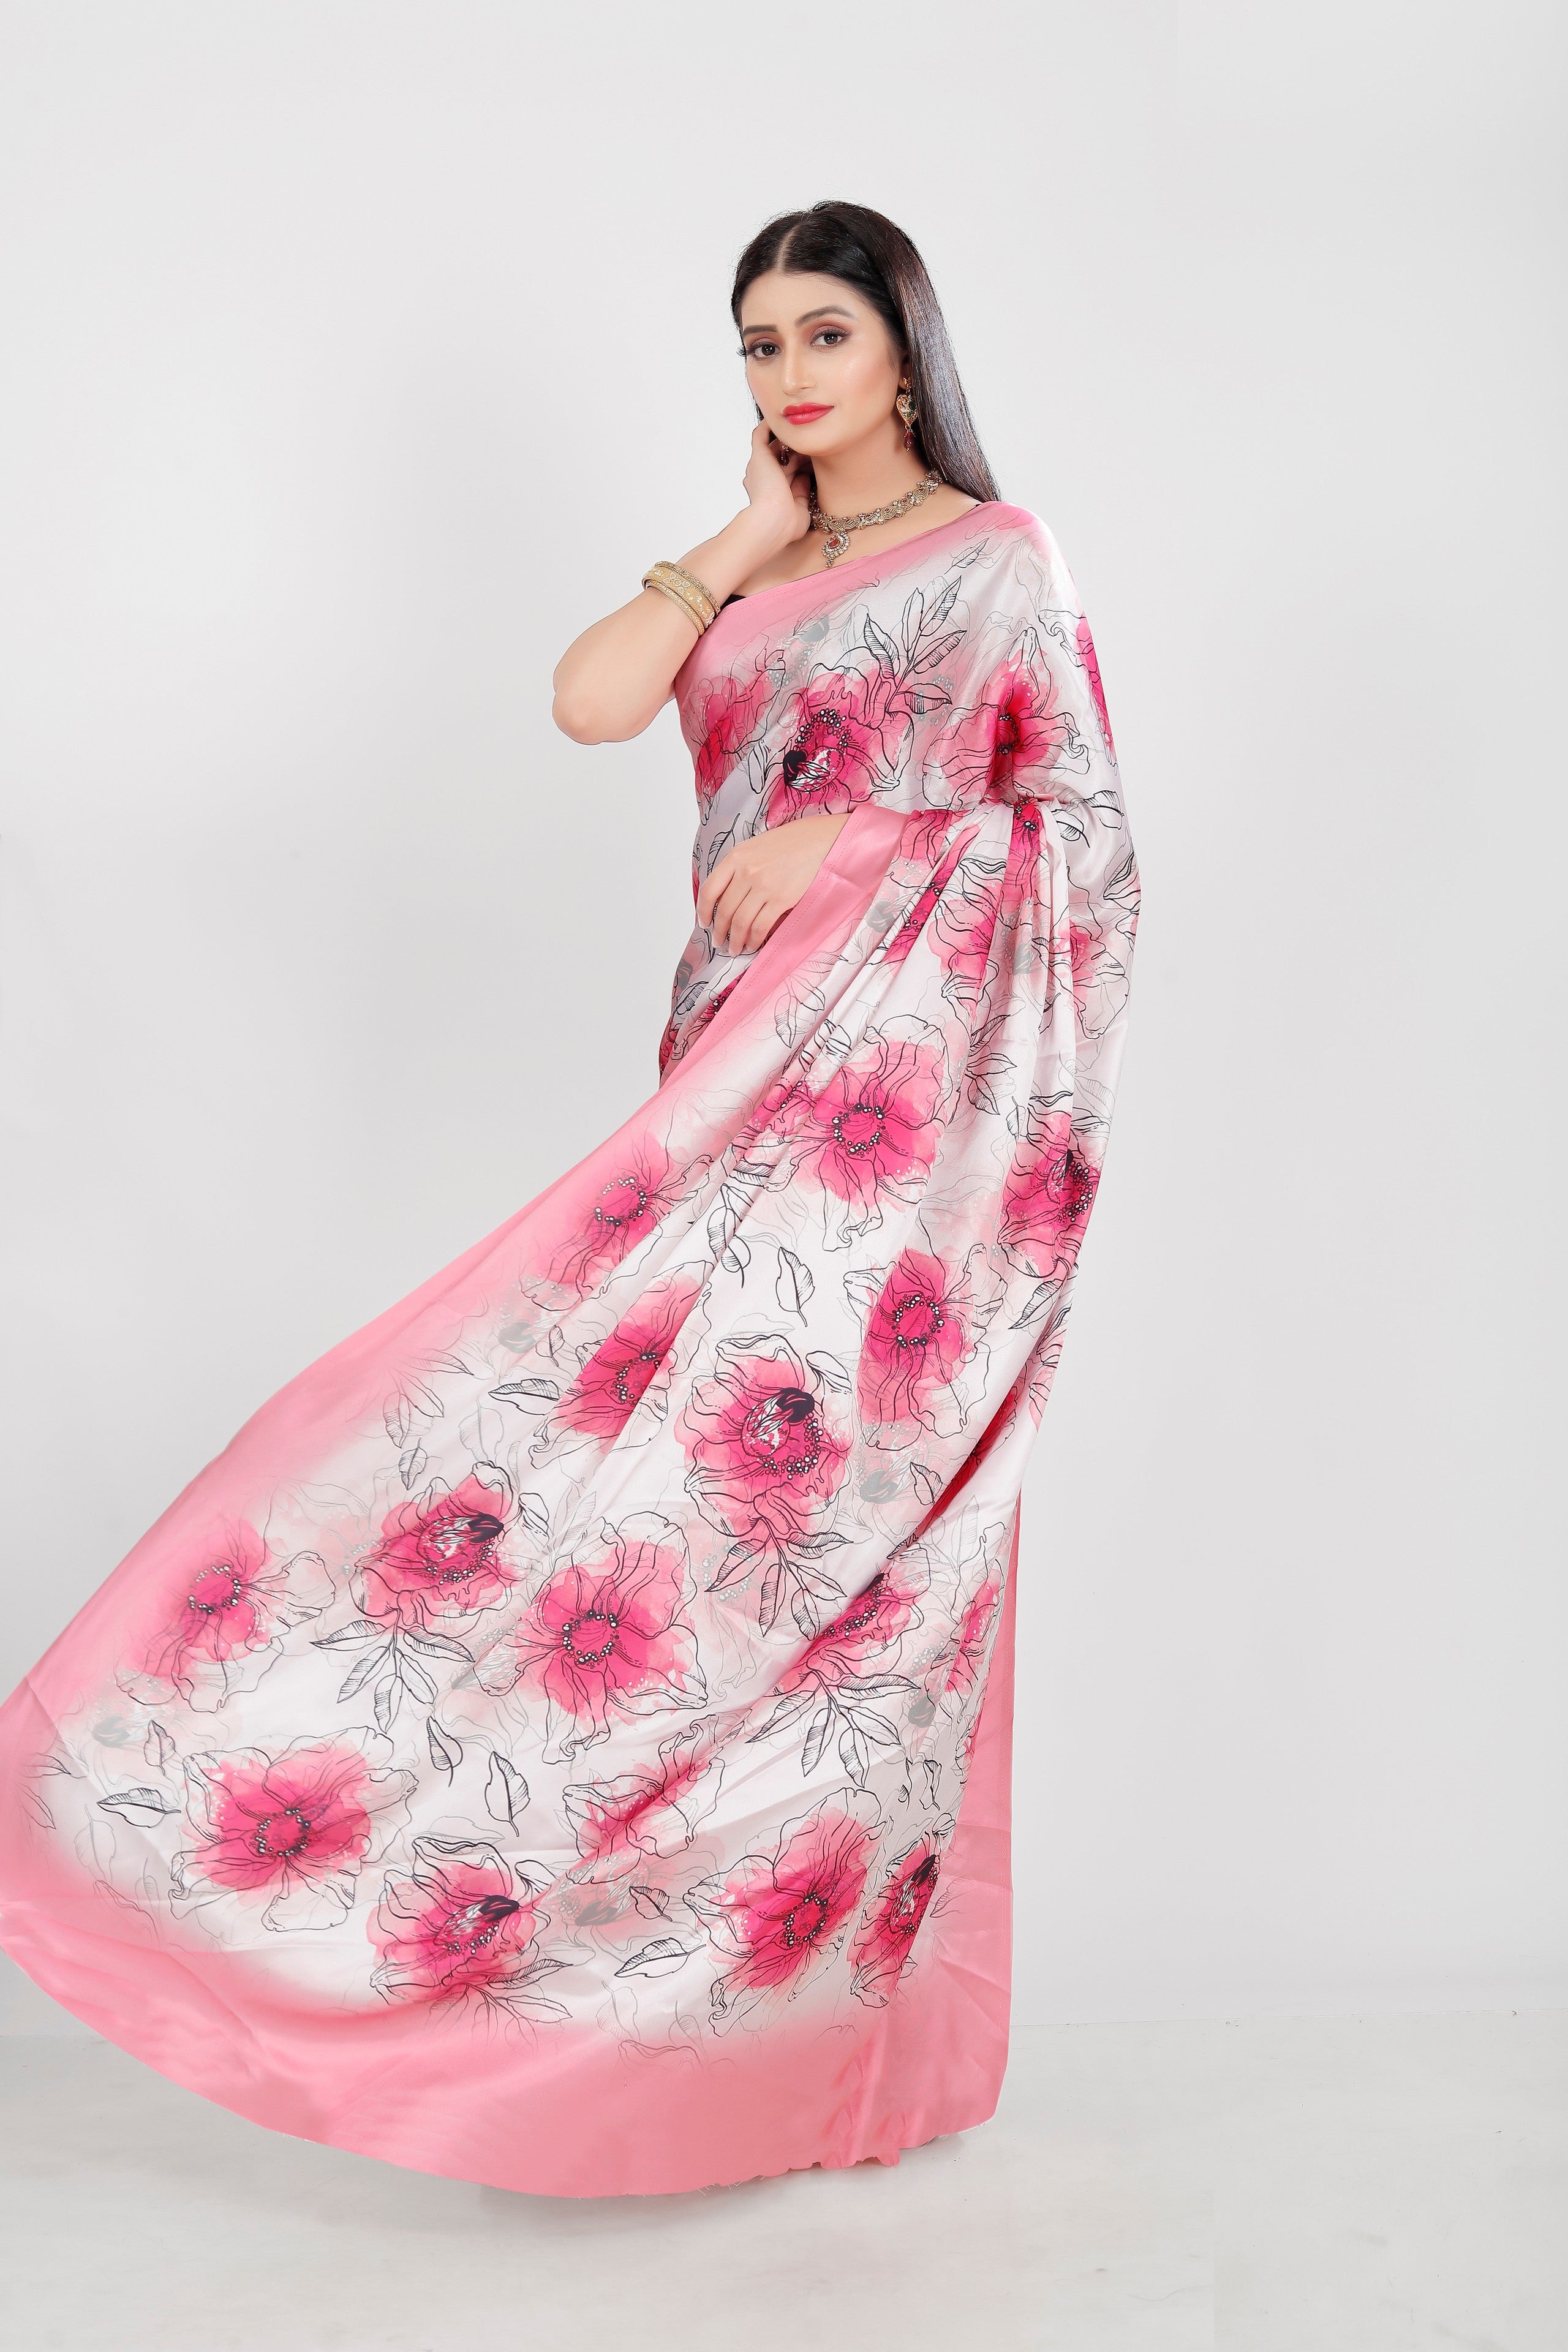 Off white and Pink Color Japan Satin Saree -Adhyay  Collection YF#20180 - YellowFashion.in by Ozone Shield